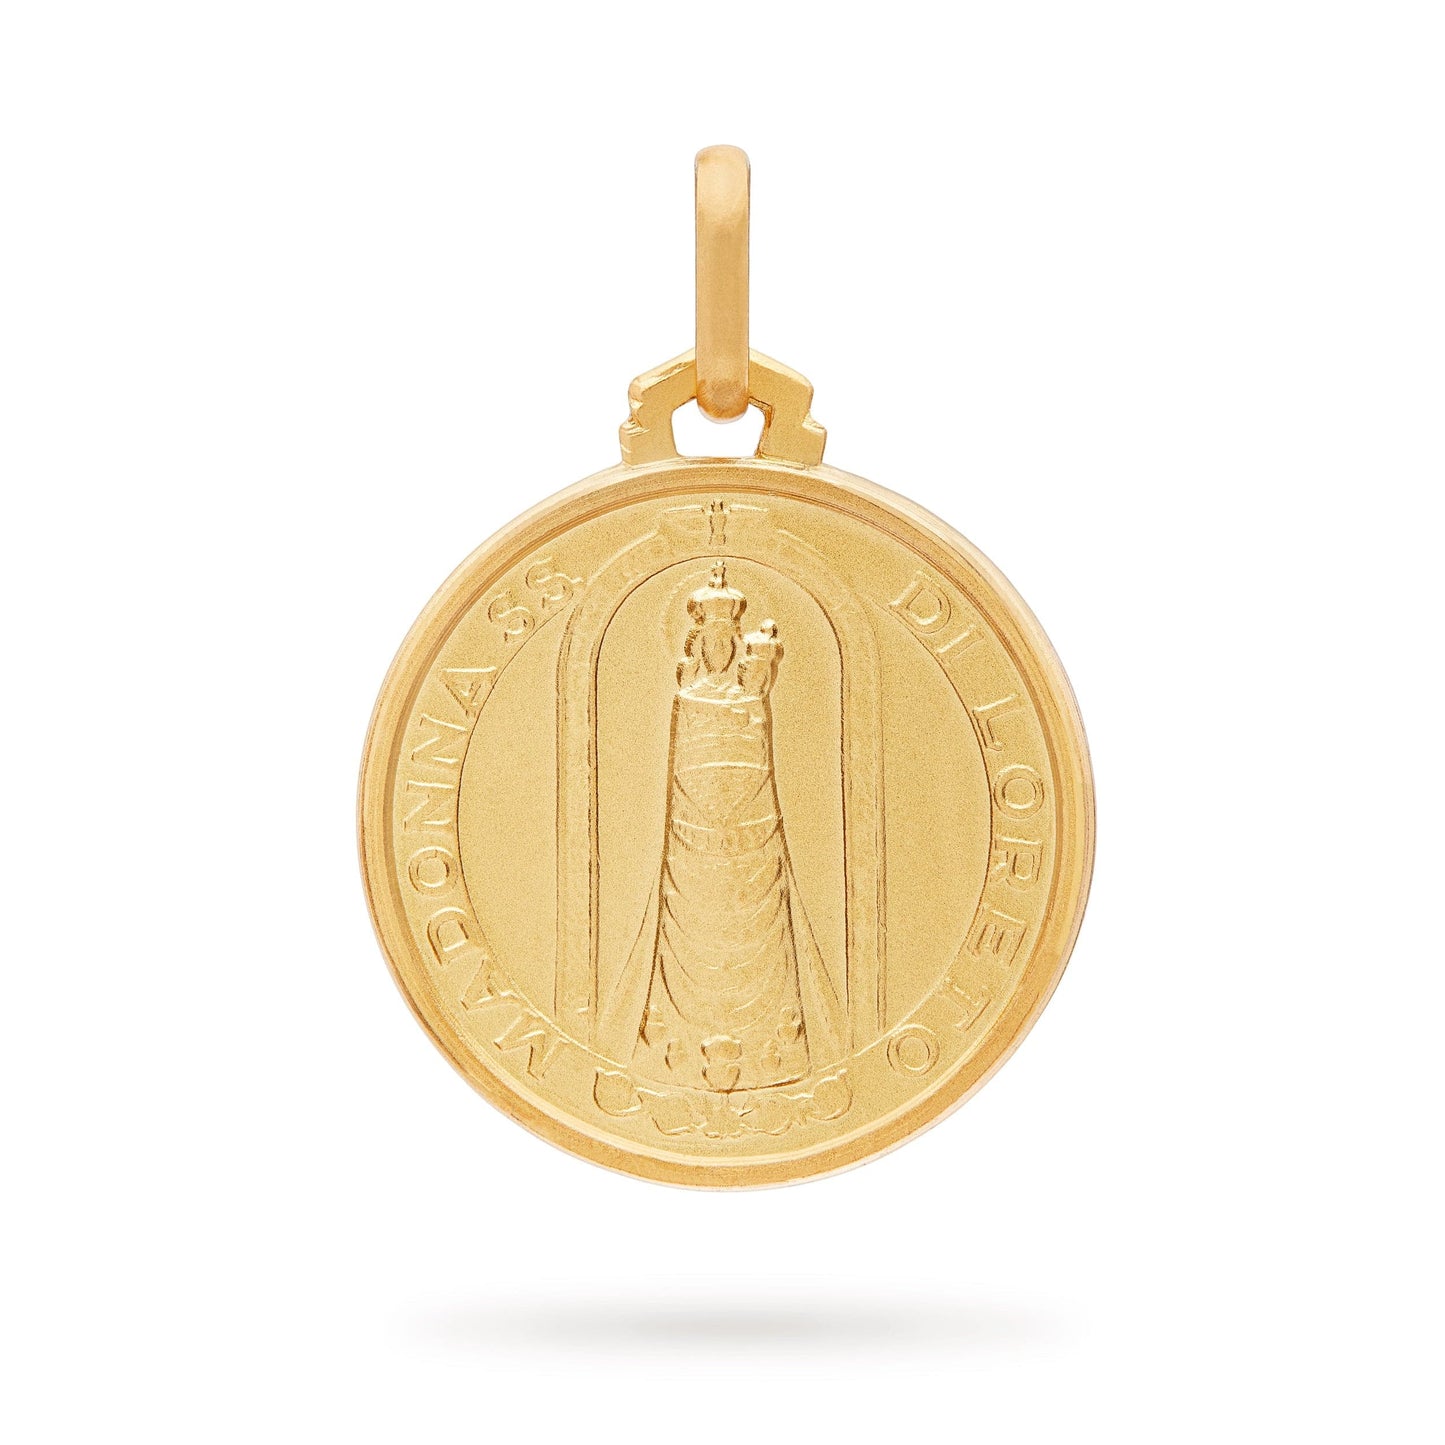 MONDO CATTOLICO Jewelry Gold medal of Our Lady of Loreto